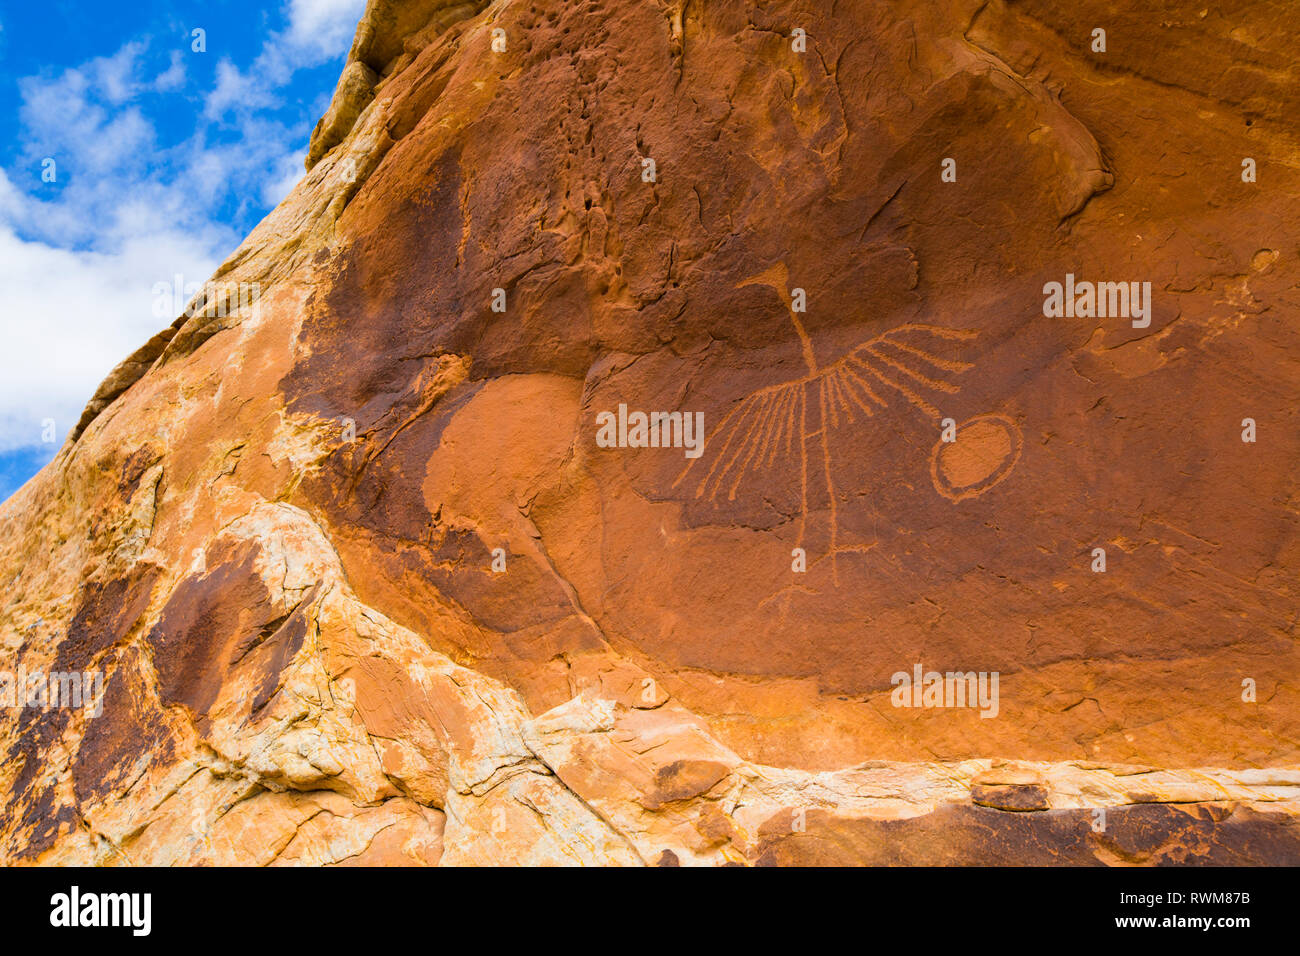 Big crane pictograph done by ancestral Puebloans, approximately 900-1000 years old, Bears Ears National Monument; Utah, United States of America Stock Photo